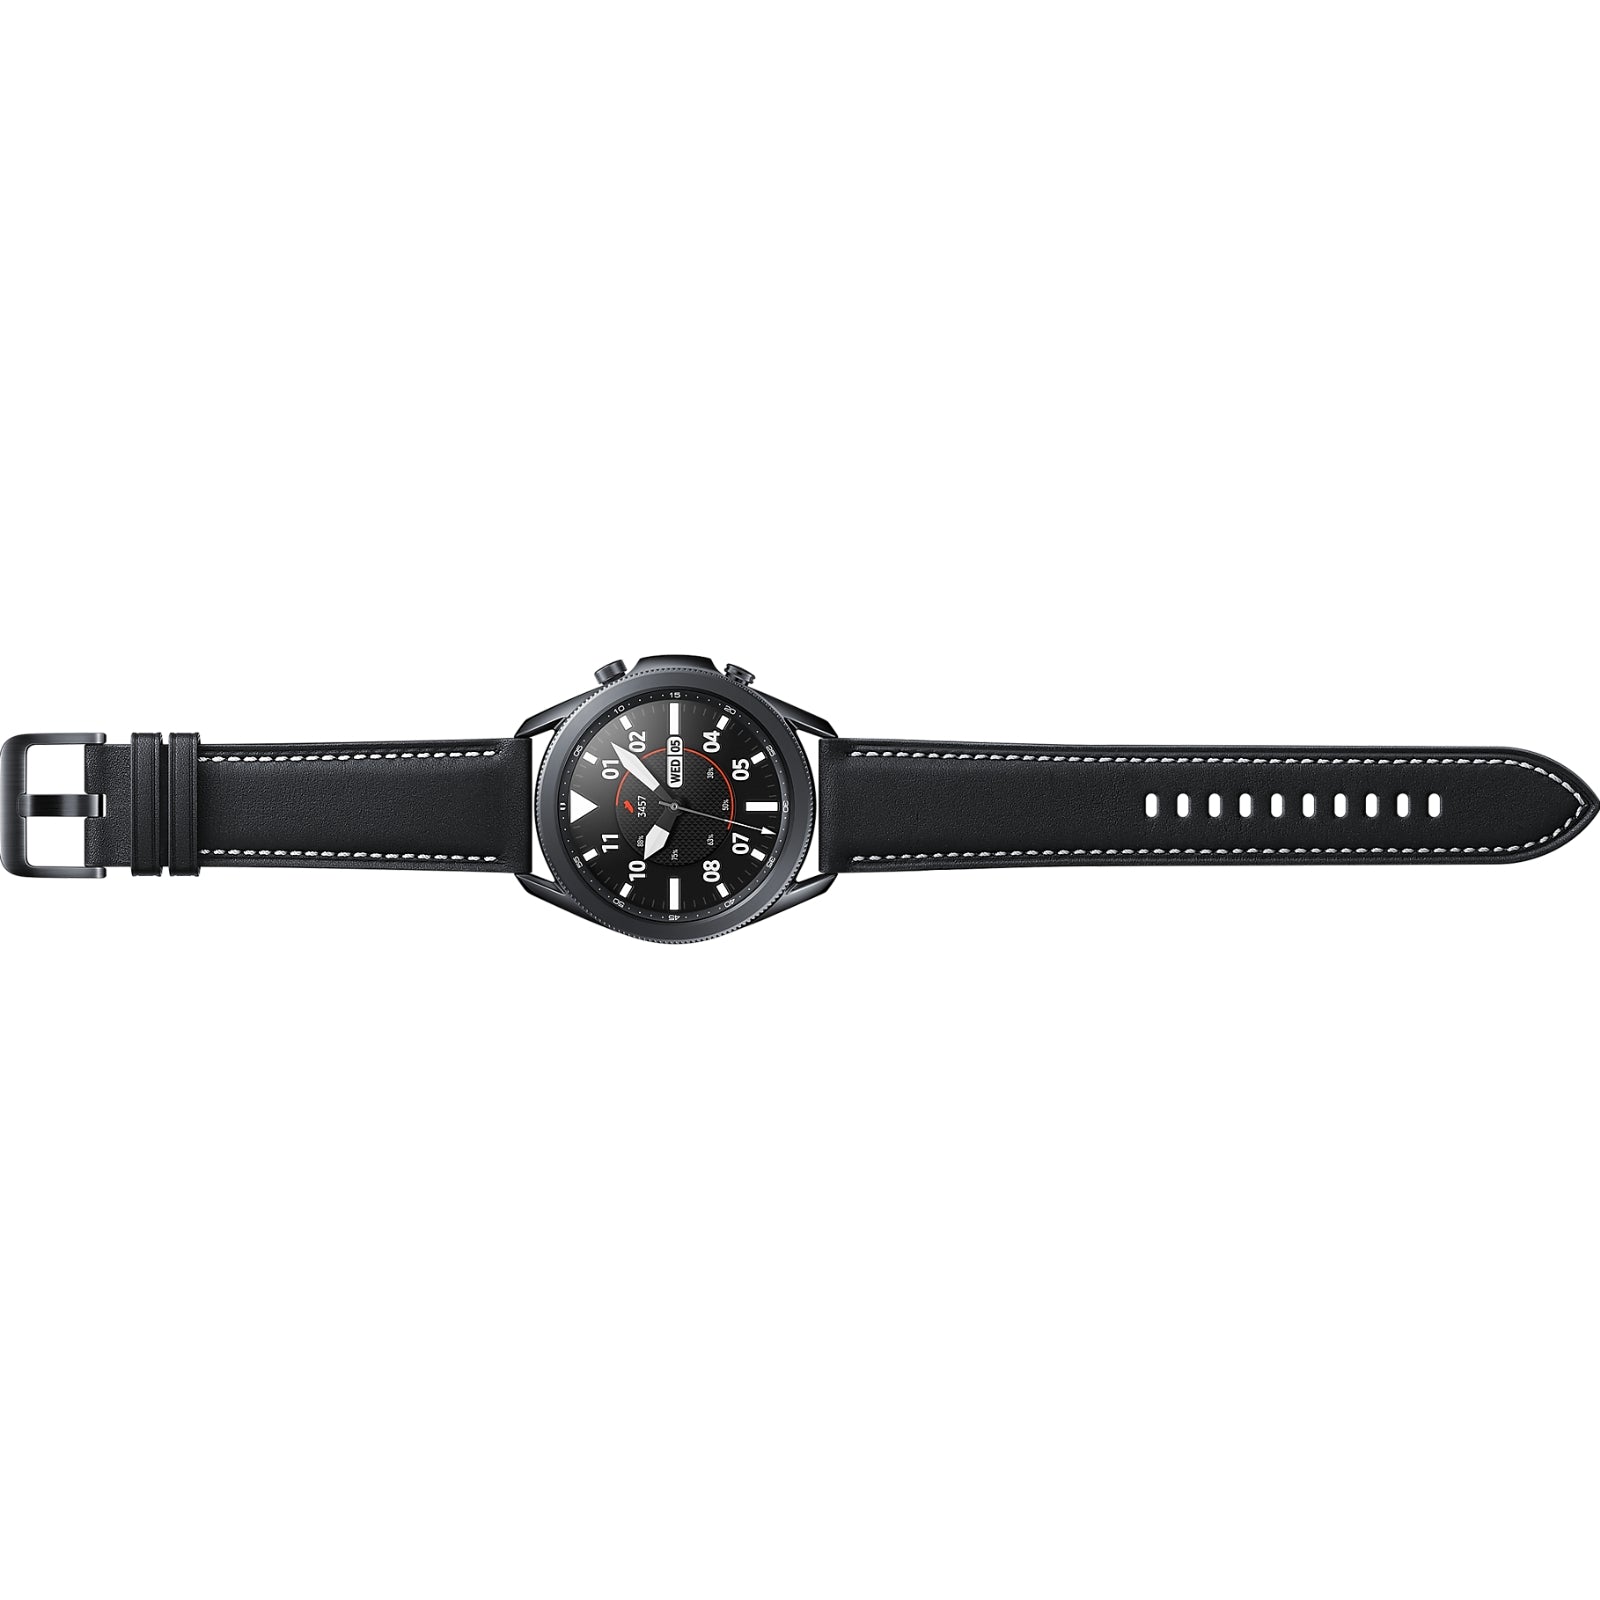 Samsung Galaxywatch 3 Stainless 45mm R840 M.black - MyMobile